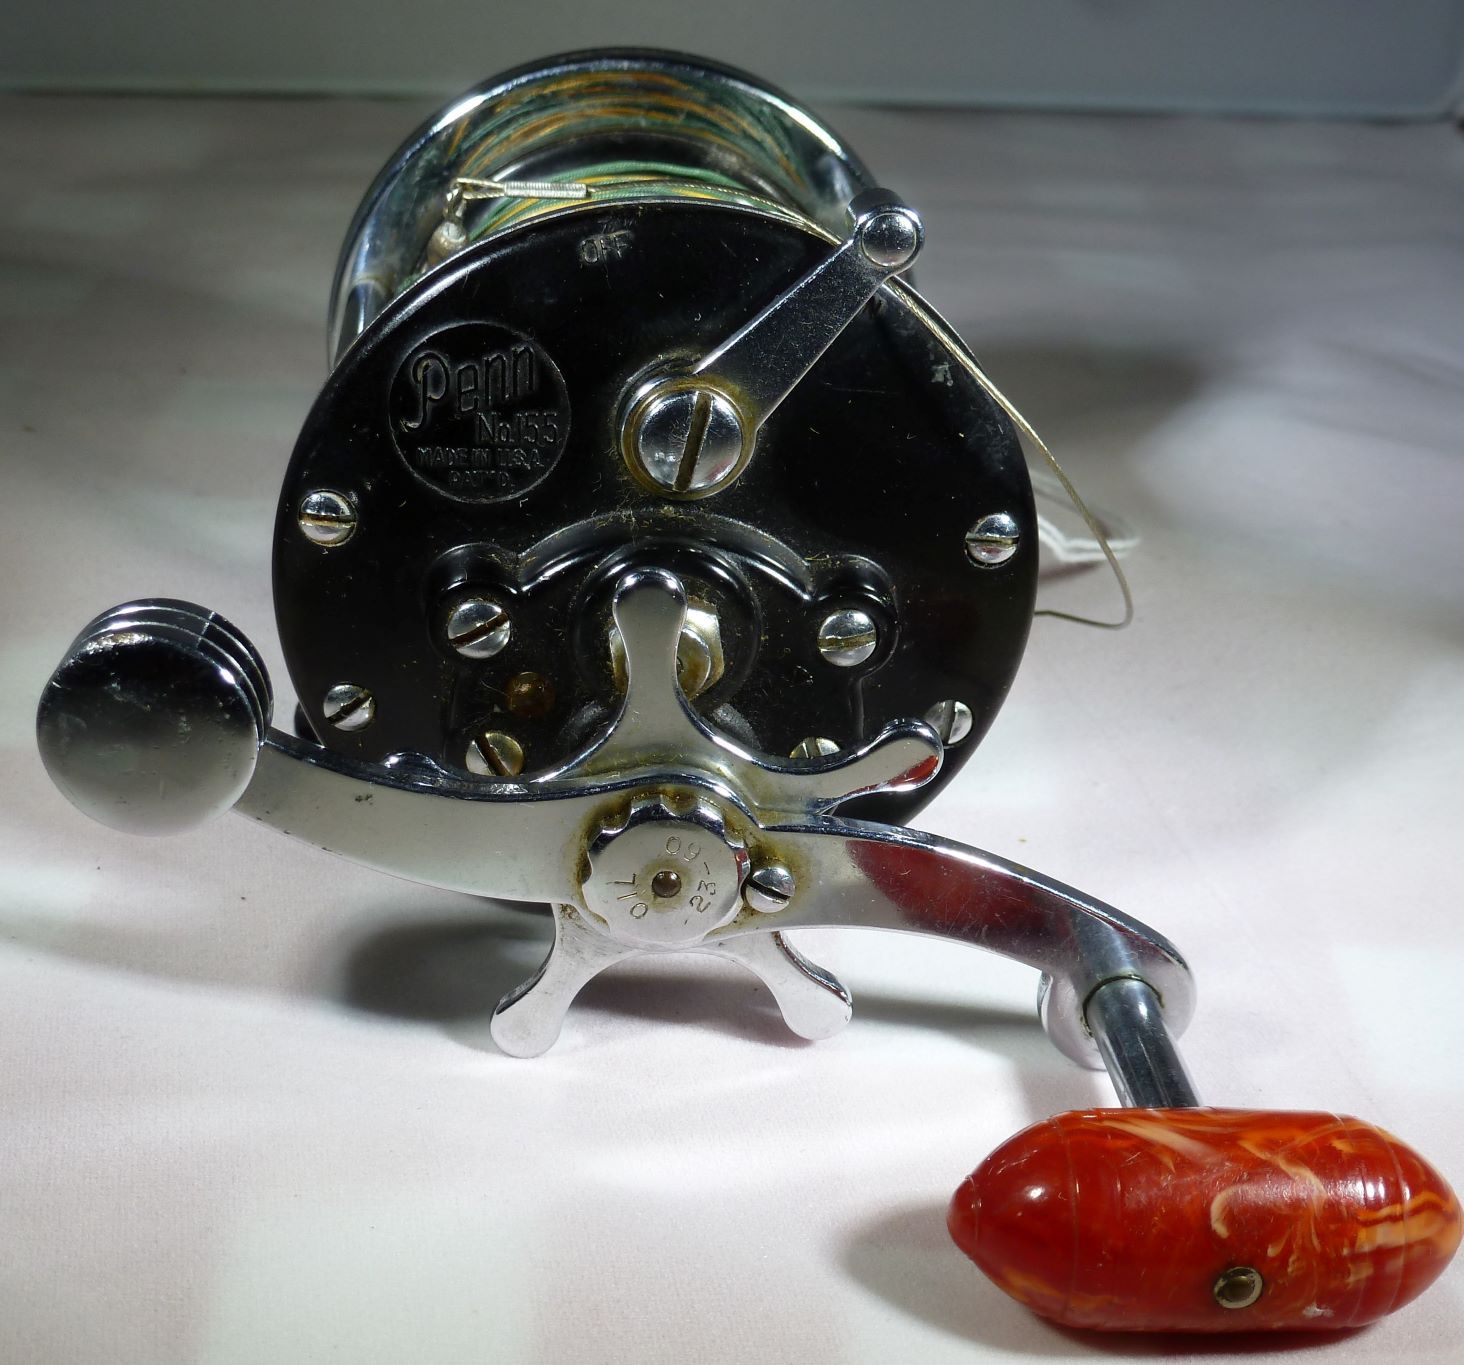 Sold at Auction: Penn Pear #109 Fishing Reel